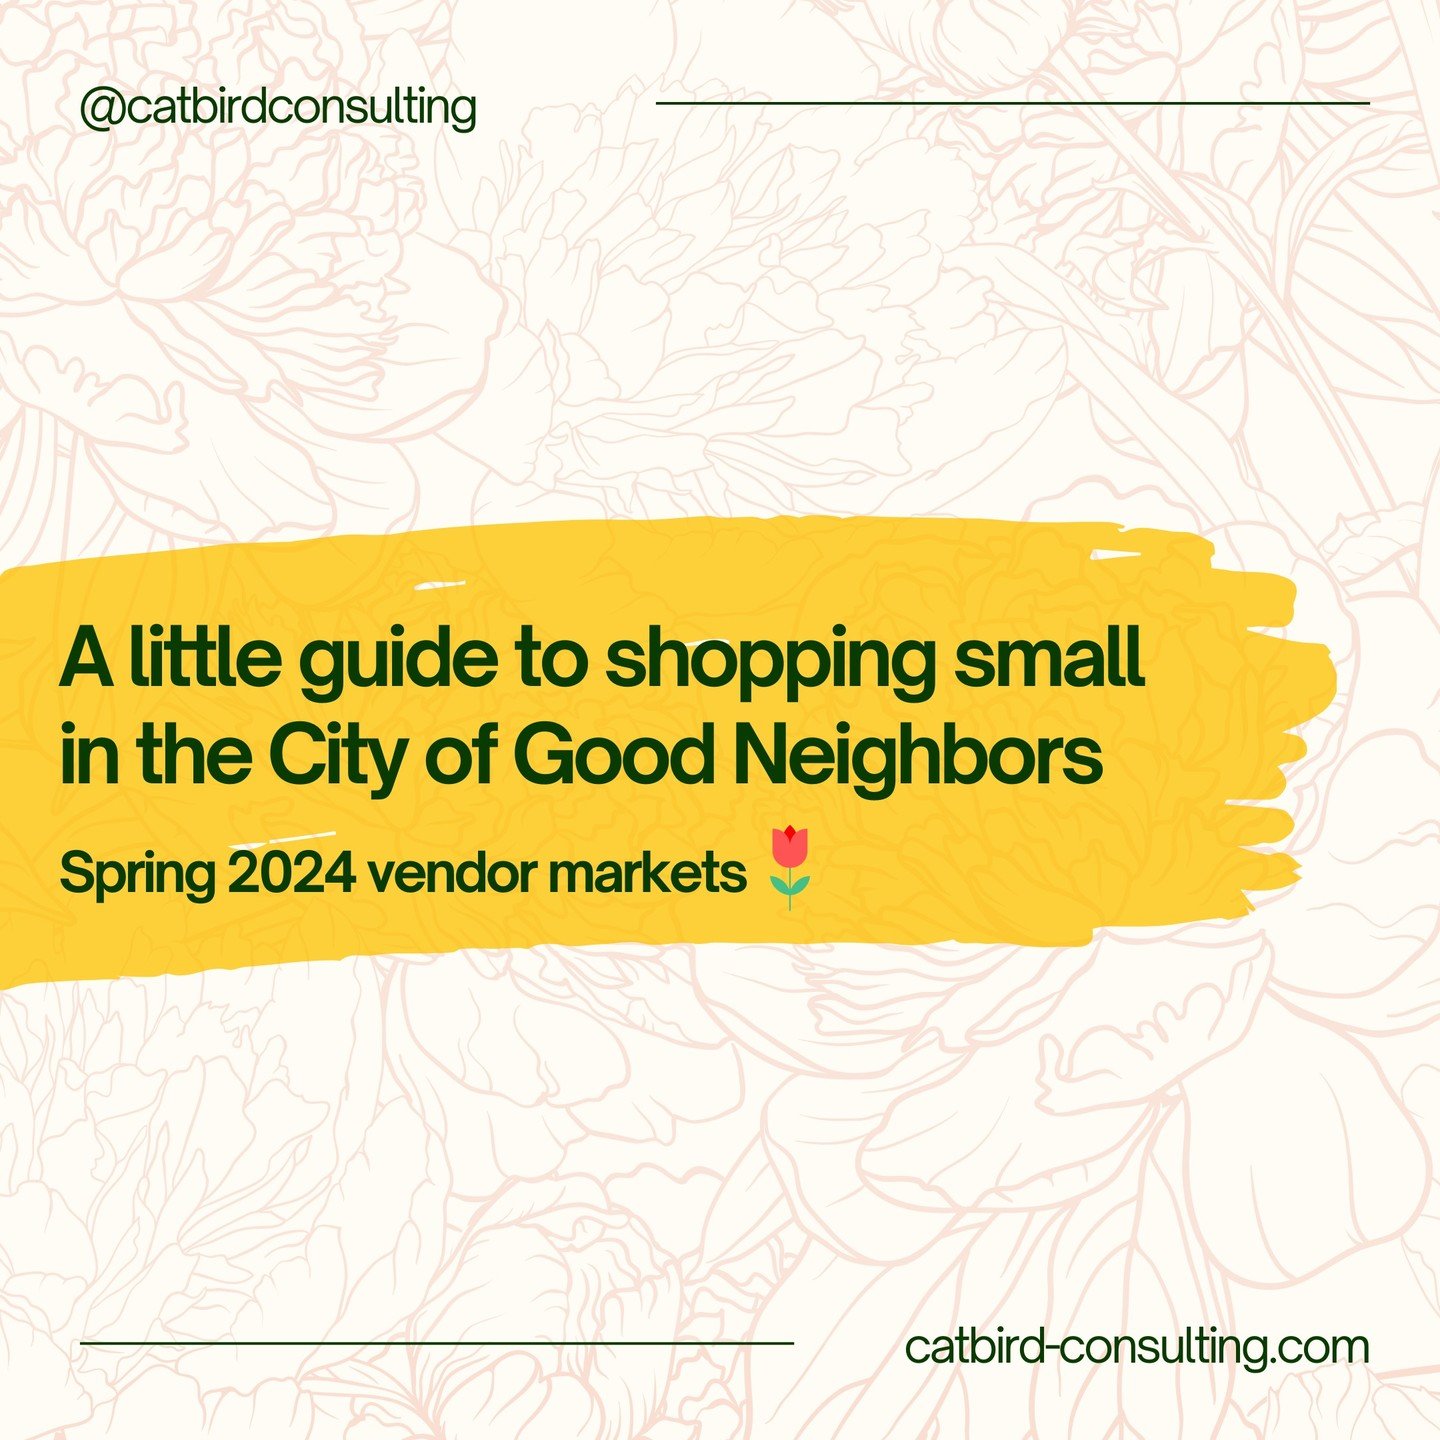 It&rsquo;s finally spring! 🌞🌷🪻🐣

What better way to celebrate than shopping small and supporting local artists, makers, and craftspeople at vendor markets and pop-ups all season long?

Swipe through for a roundup of spring markets around Western 